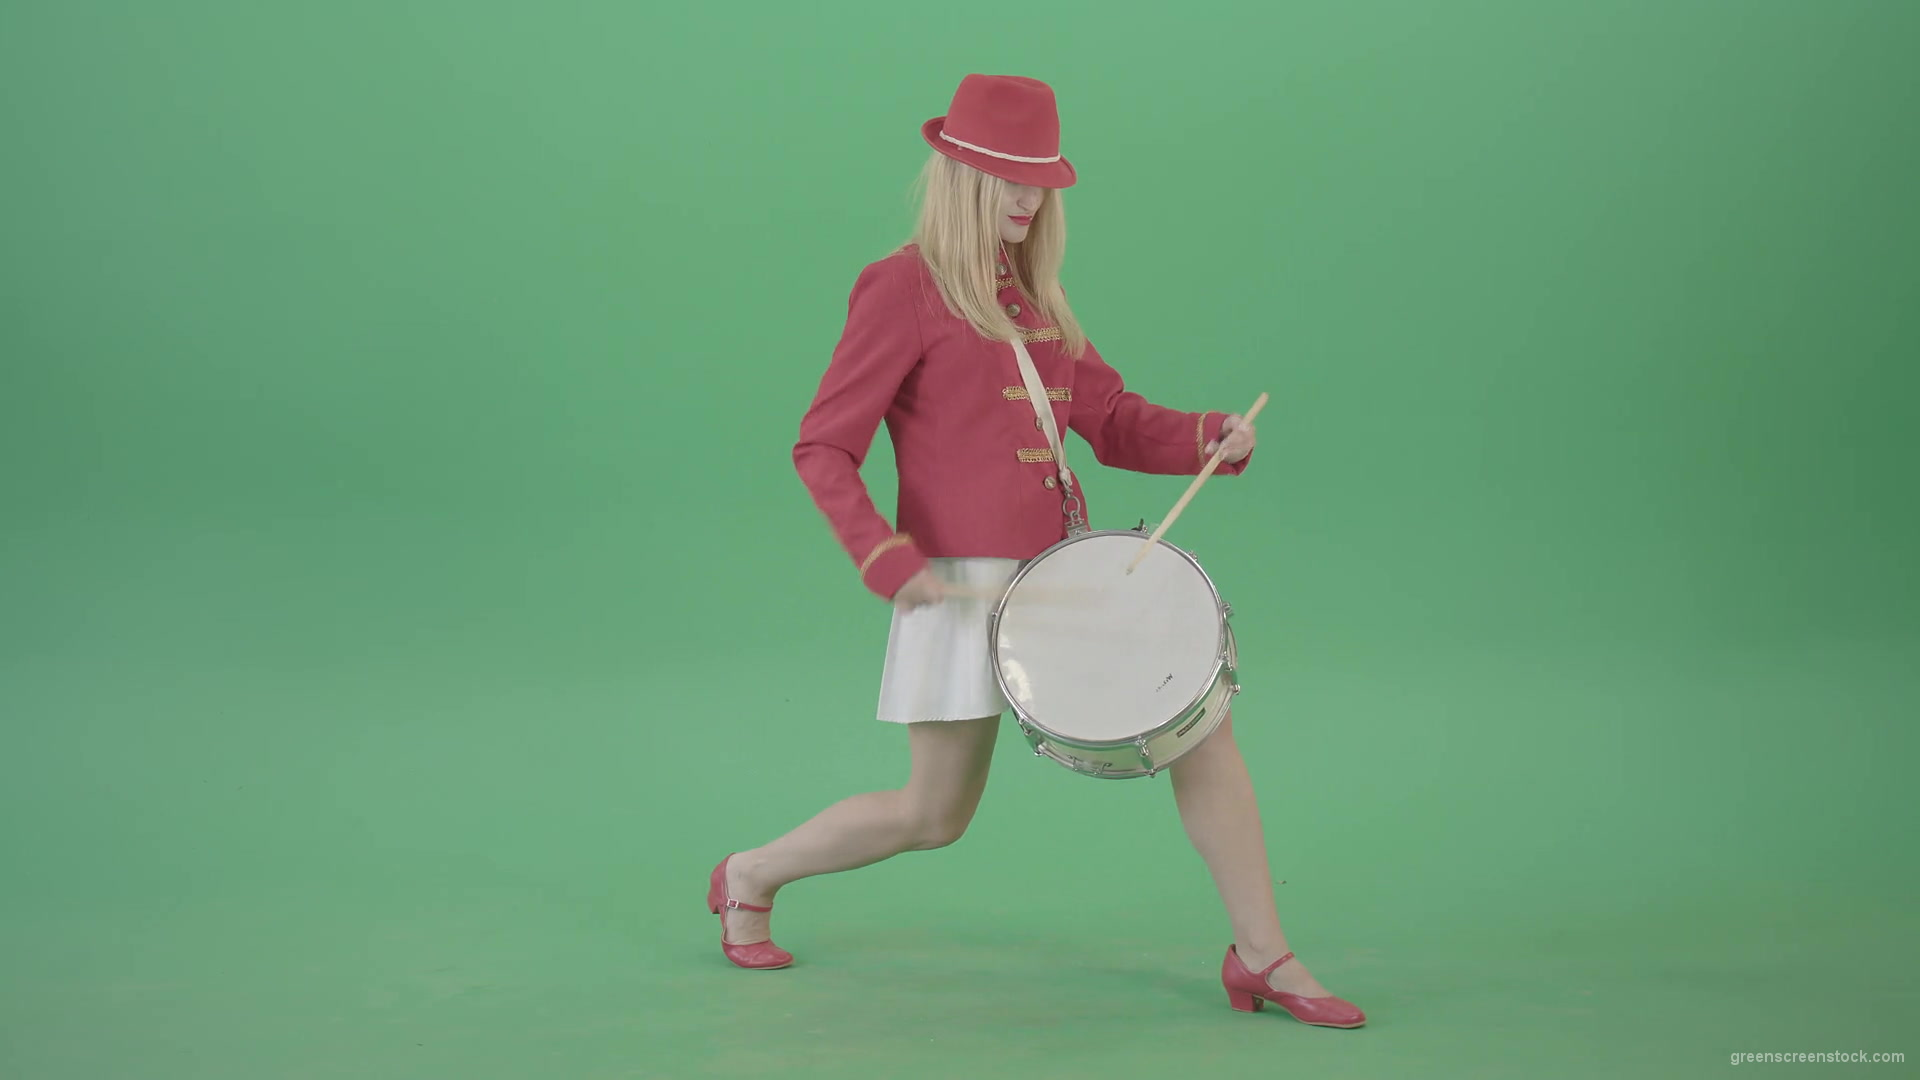 vj video background Blonde-Girl-in-Red-Uniform-making-beats-on-music-drum-instrument-in-active-pose-on-green-screen-4K-Video-Footage-1920_003